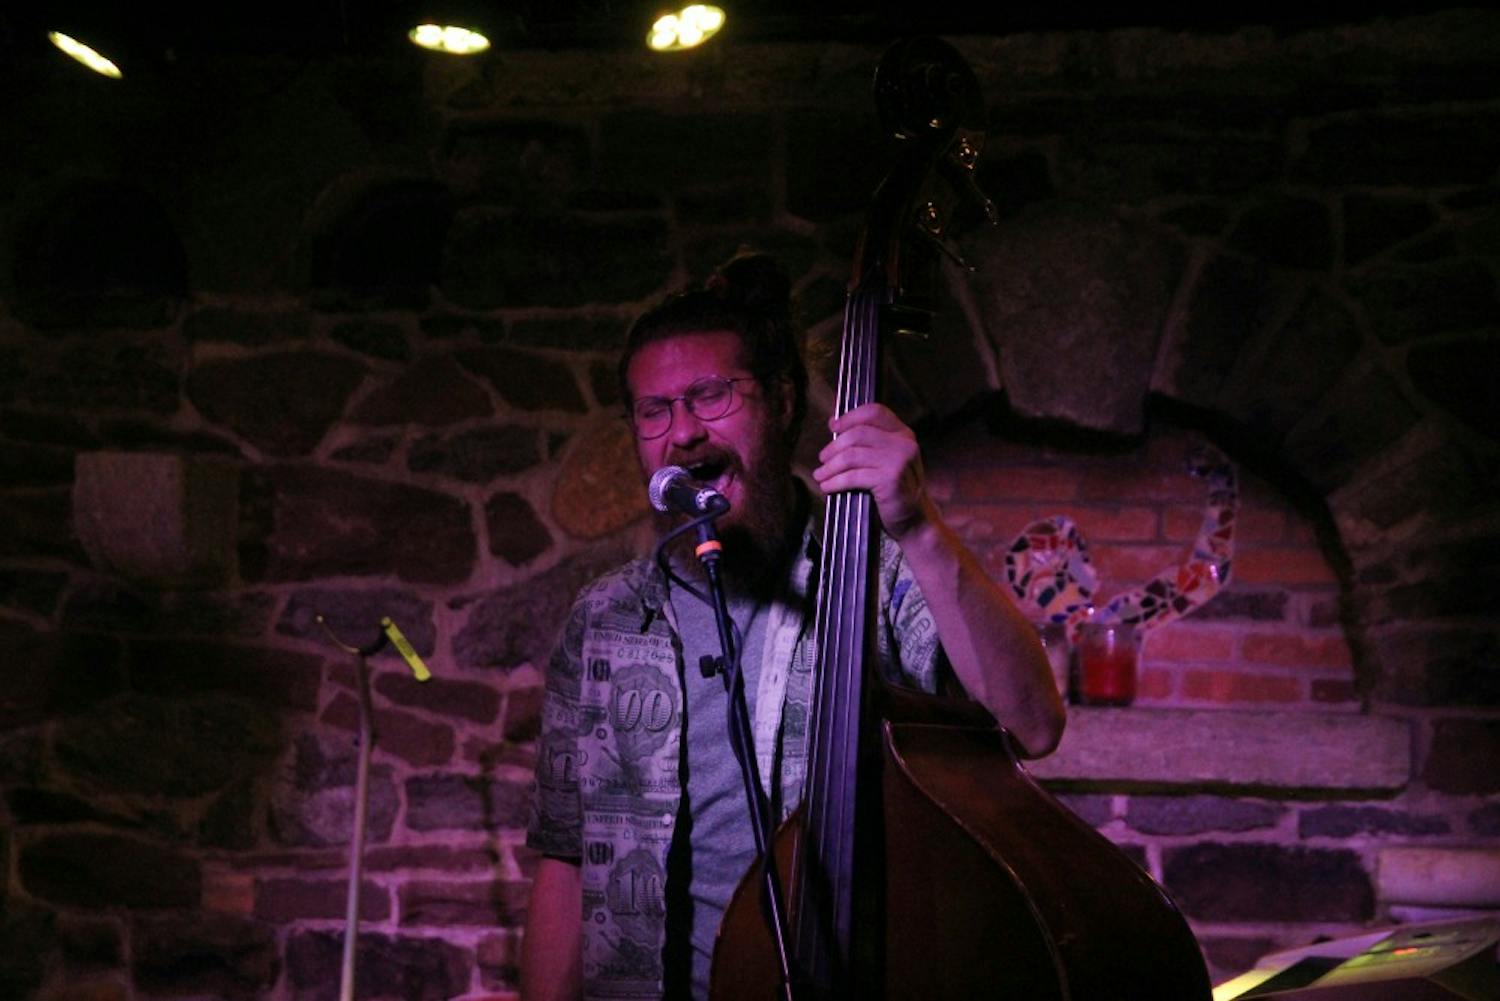 Bassist and singer Casey Abrams performed songs and covers&nbsp;new and old at Babeville's The&nbsp;9th Ward on Saturday night.&nbsp;